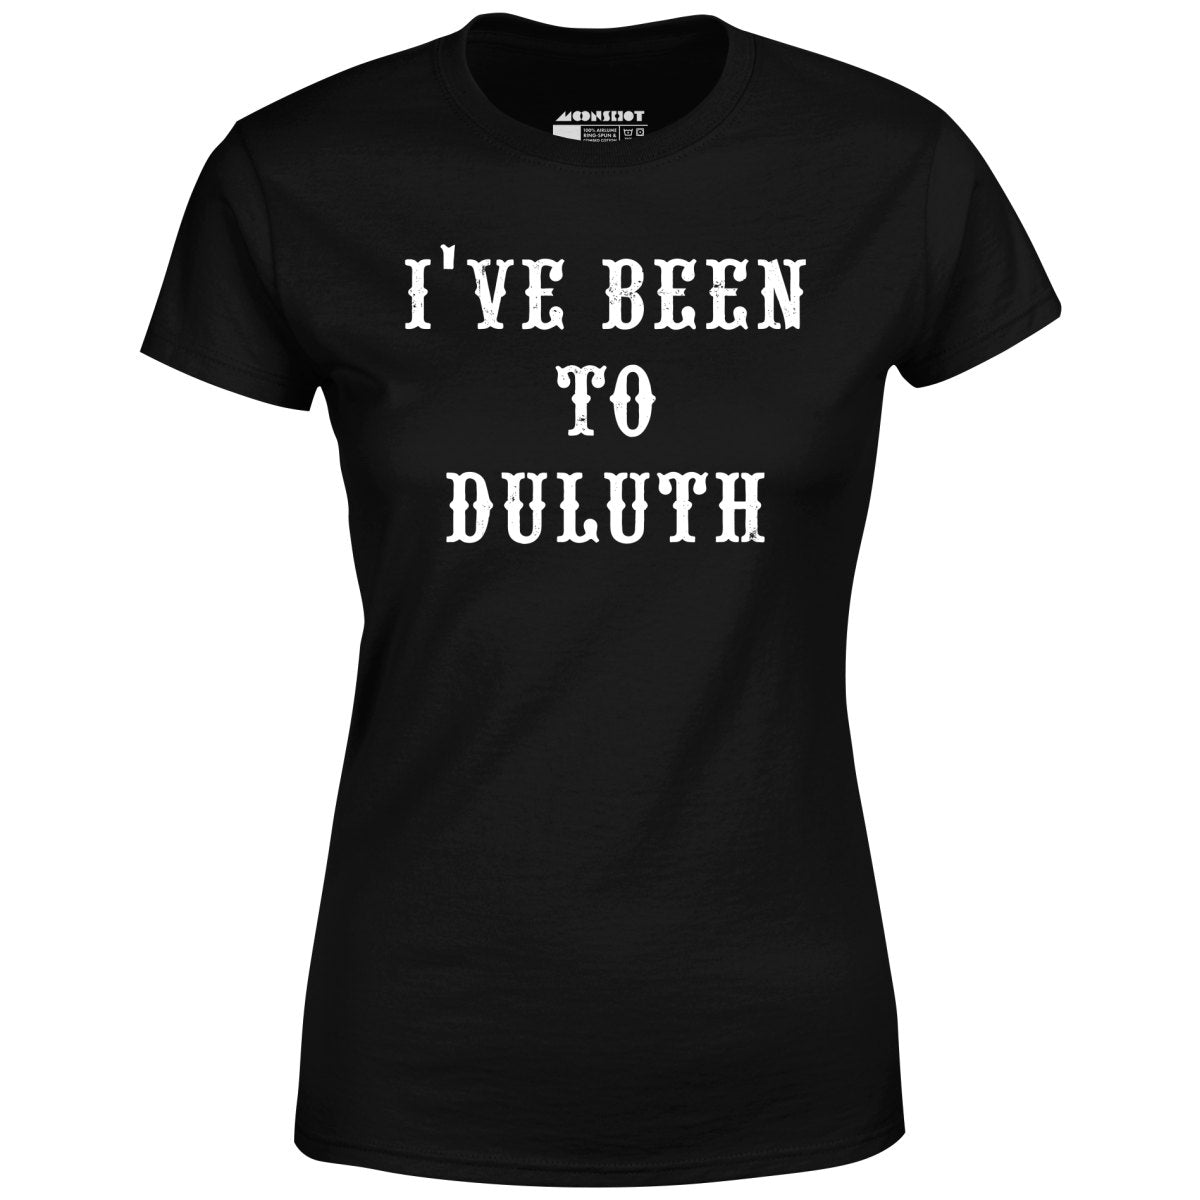 I've Been to Duluth - Women's T-Shirt